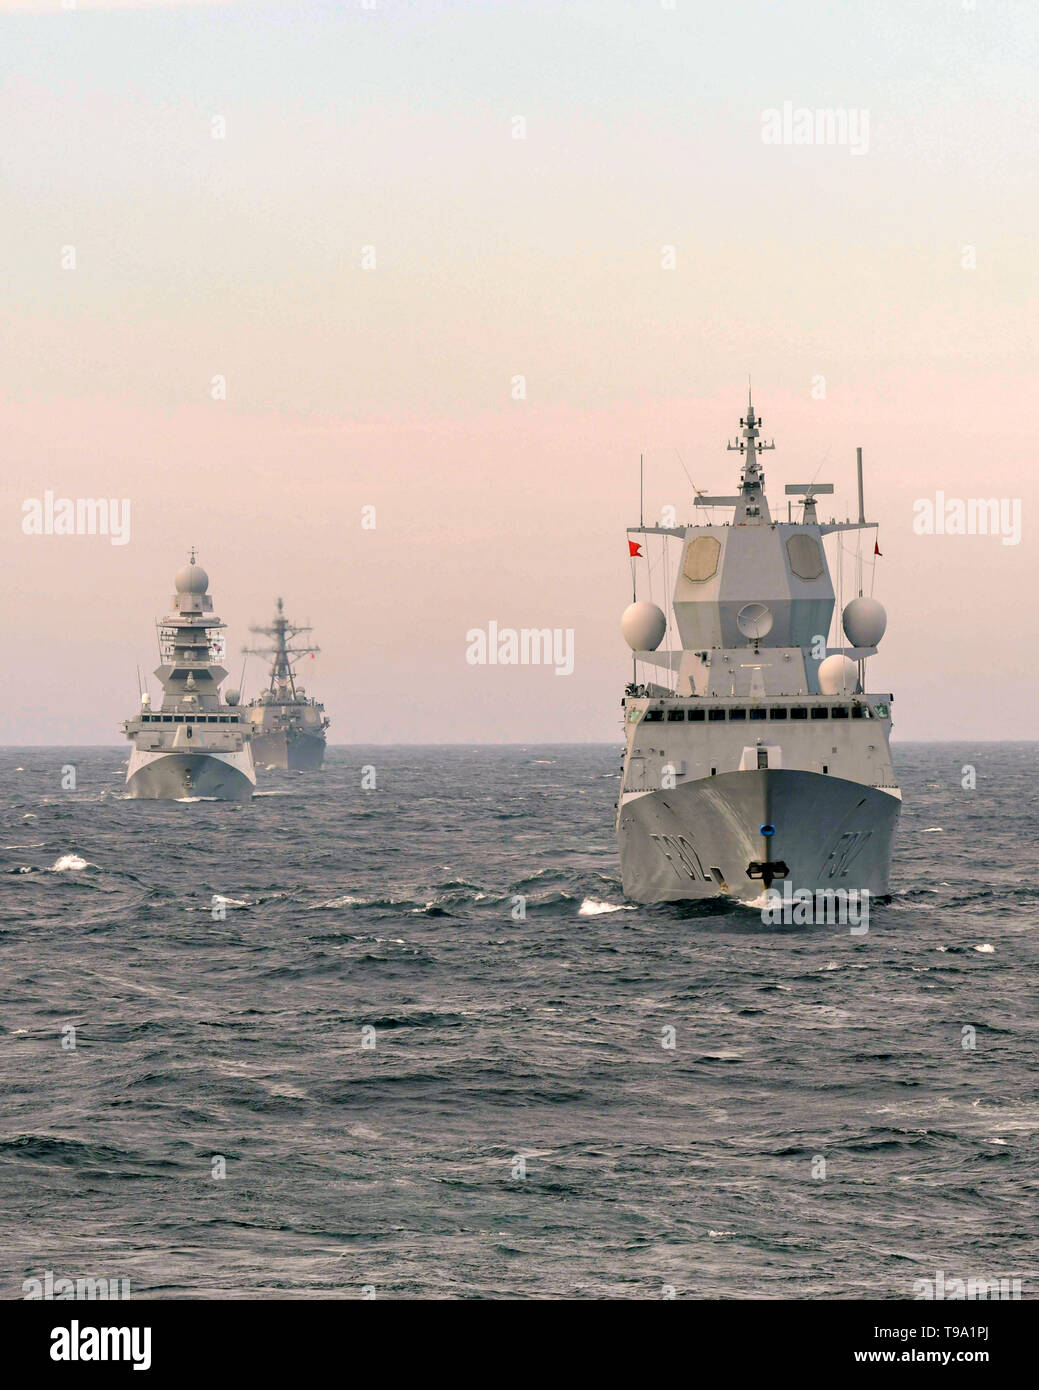 The Royal Norwegian Navy frigate HNOMS Otto Sverdrup, Italian Navy Bergamini class frigate ITS Bergamini and the U.S. Navy Arleigh Burke-class guided-missile destroyer USS Roosevelt steam in formation during exercise Formidable Shield 2019 May 13, 2019 in the Atlantic Ocean. Nine nations, including Canada, Denmark, France, Italy, the Netherlands, Norway, Spain, the United Kingdom and the United States are taking part in the NATO exercise. Stock Photo